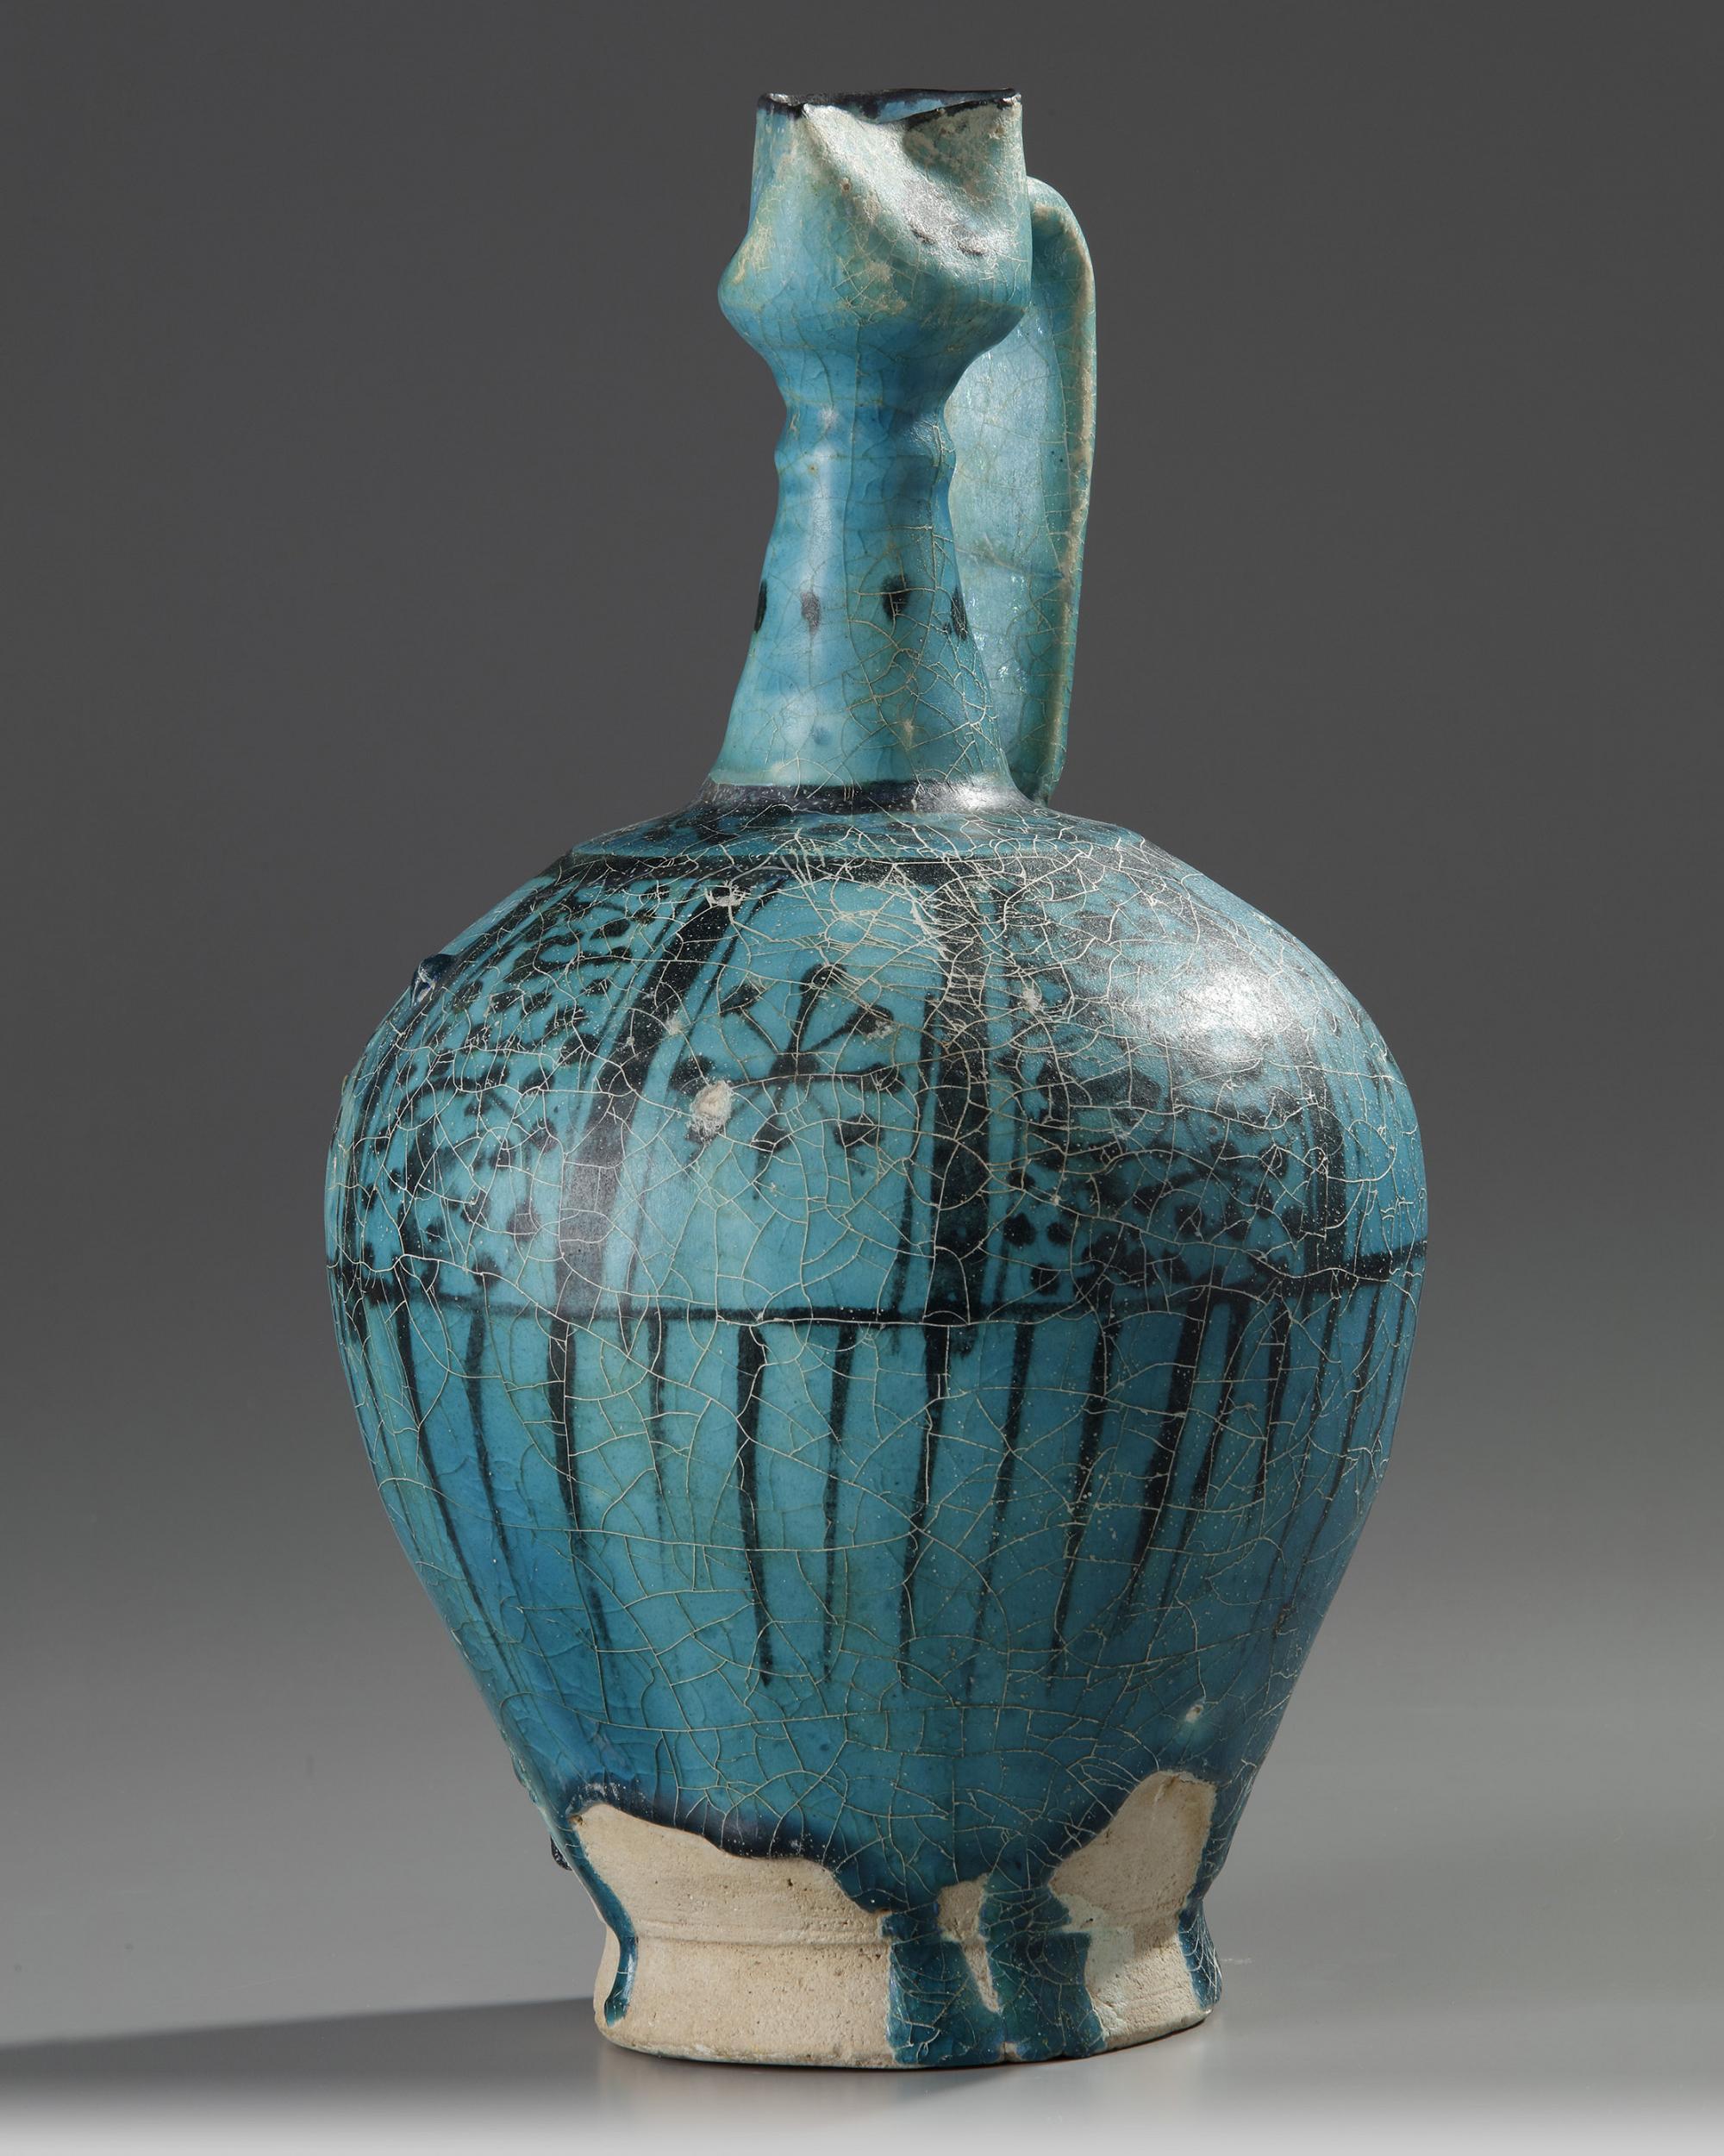 A LARGE RAQQA UNDERGLAZE PAINTED POTTERY EWER, SYRIA, 12TH-13TH CENTURY - Image 16 of 20